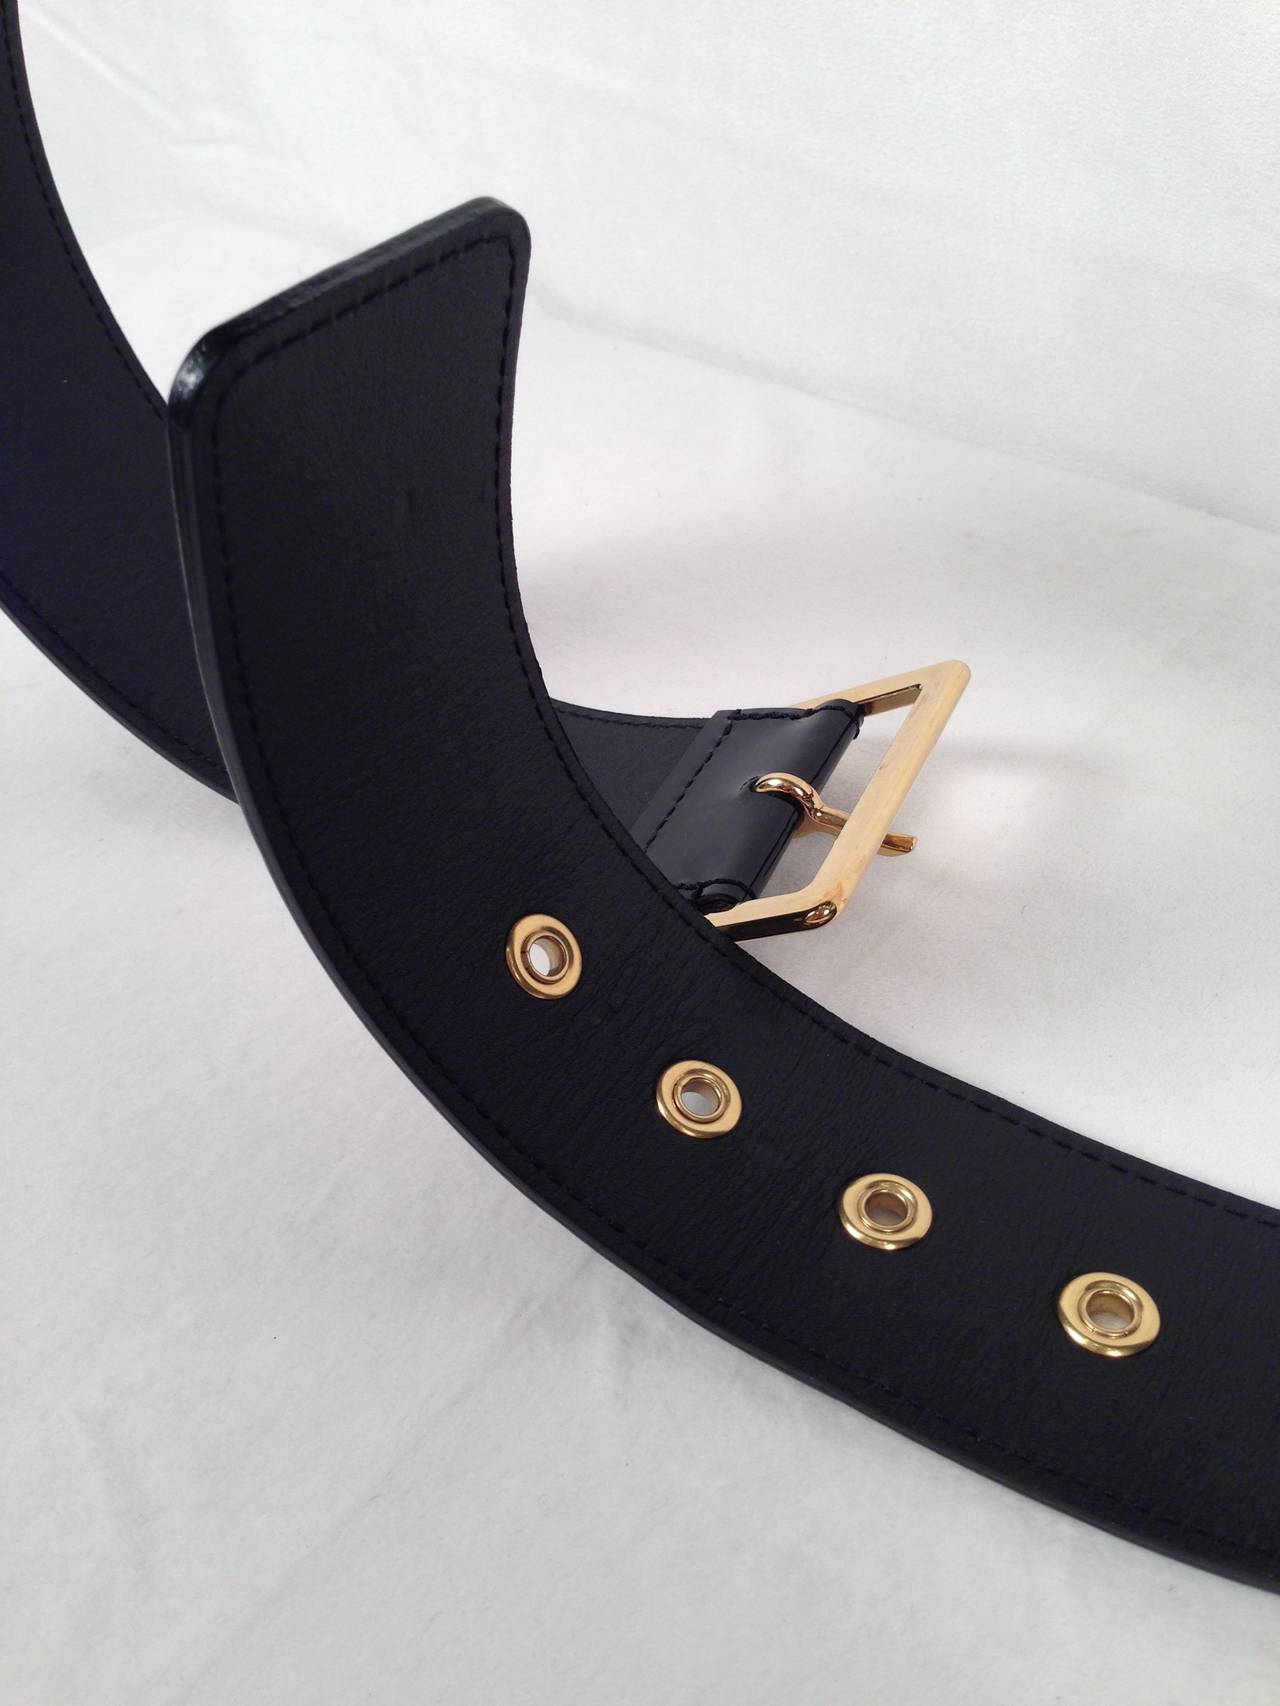 Louis Vuitton Black Patent Leather Belt For Sale at 1stdibs